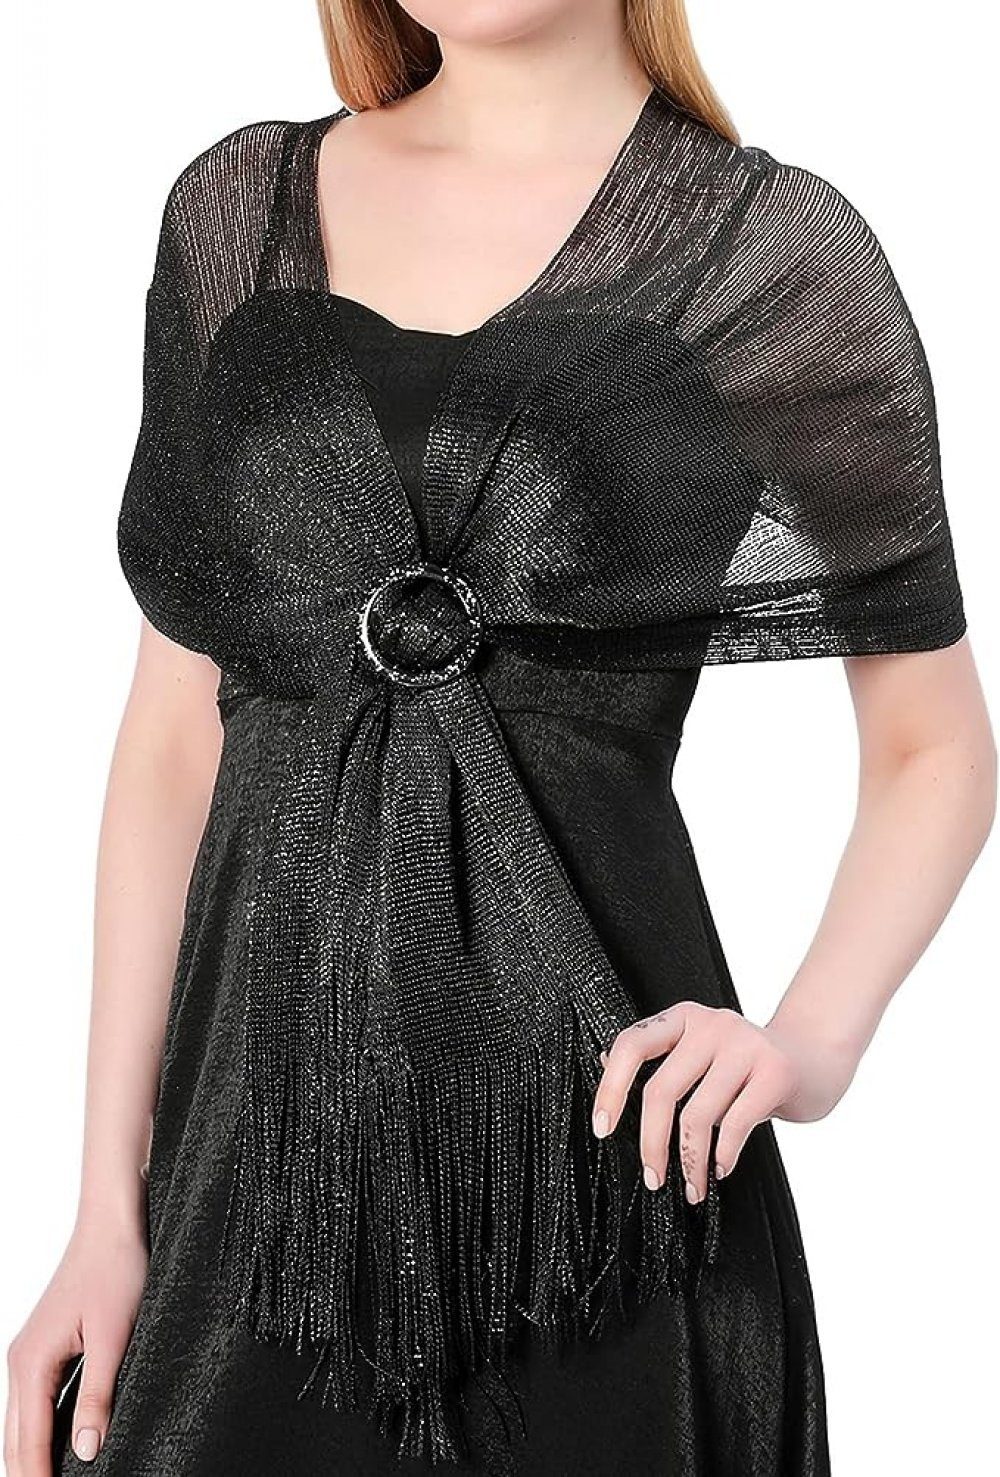 WaKuKa Schal Holiday metal buckle shawl suitable for sparkling evening parties SchwarzesSilber | 